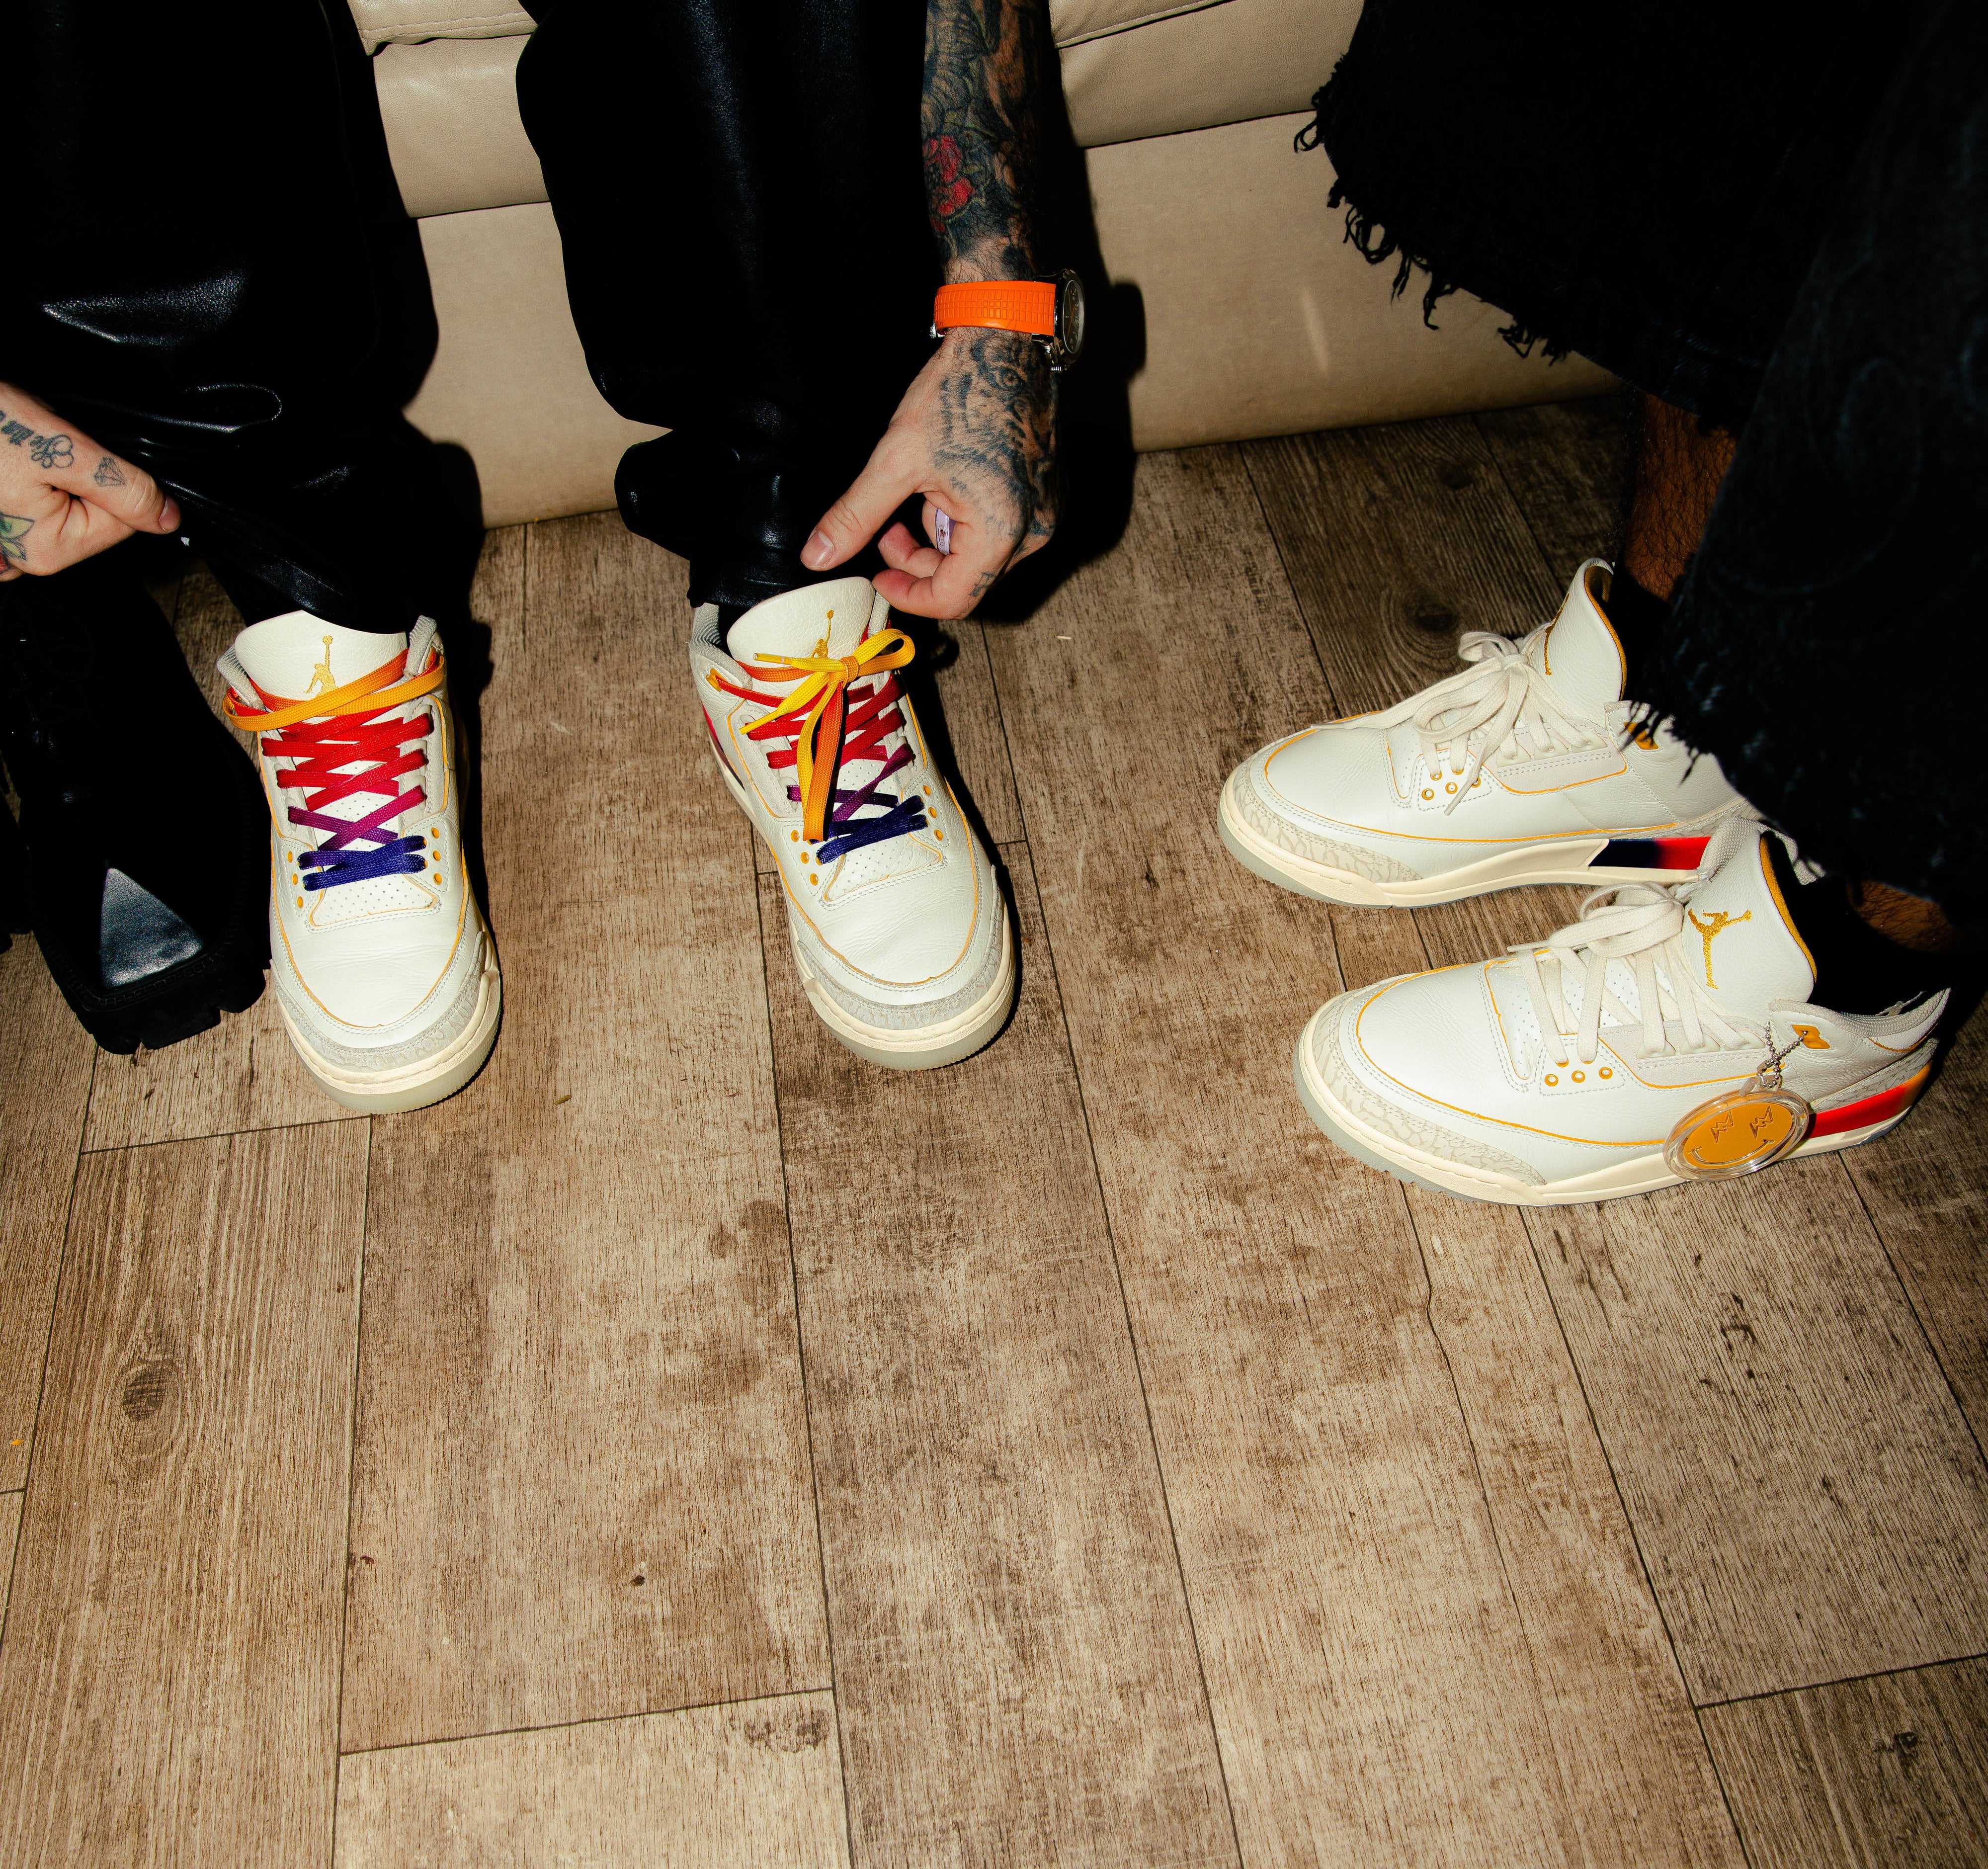 J Balvin on Air Jordan 3 Collaboration and Medellin Colombia